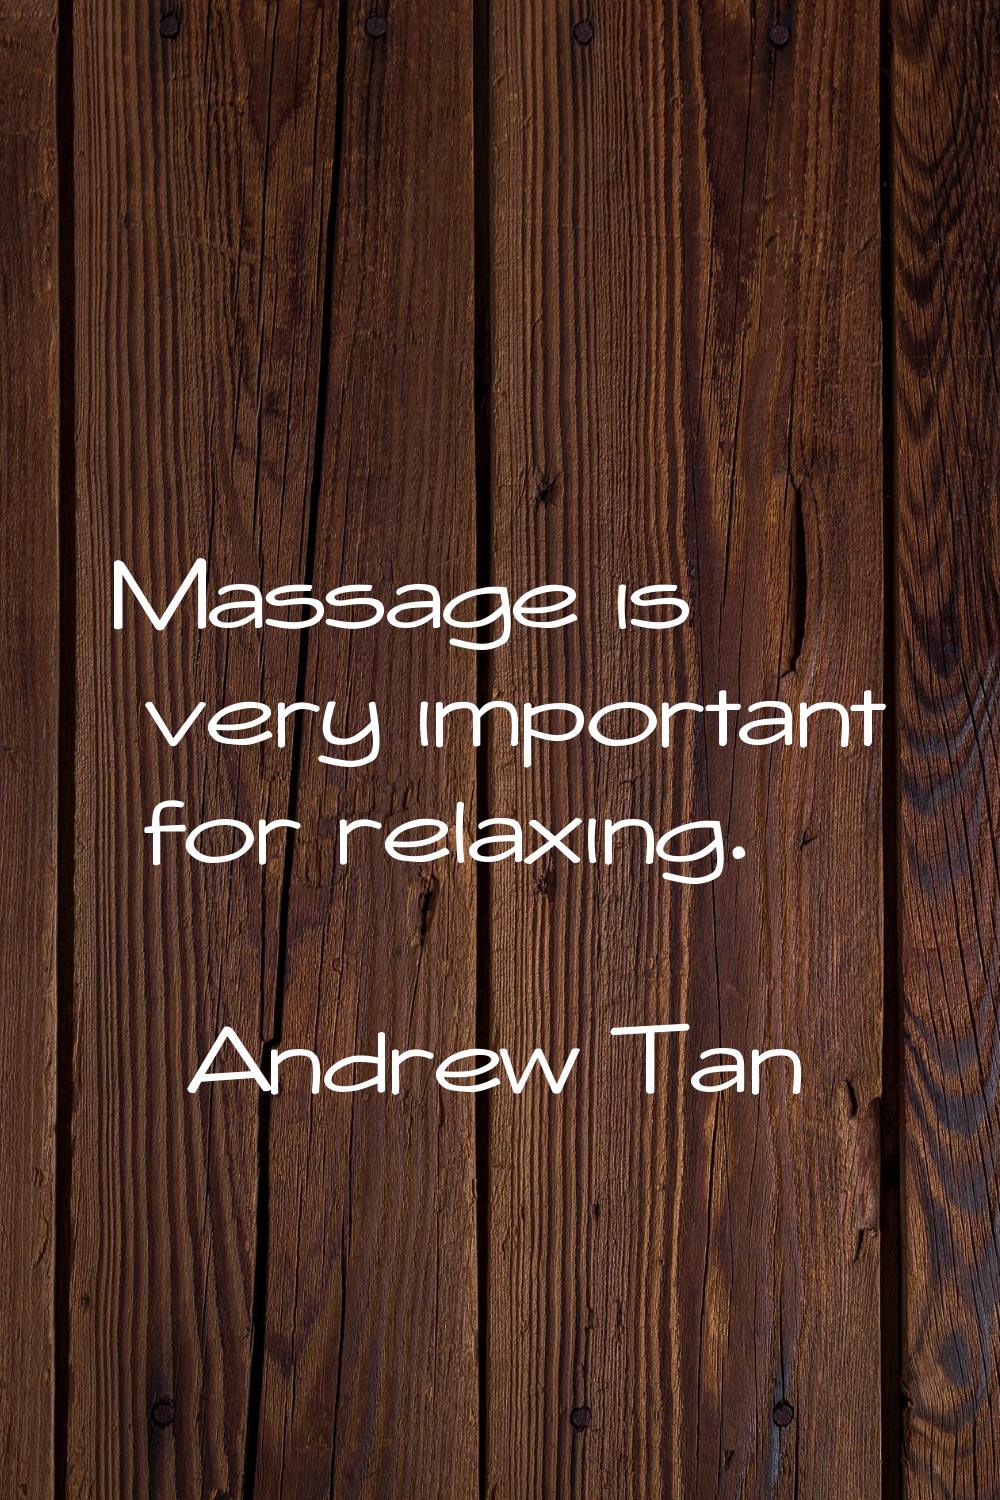 Massage is very important for relaxing.